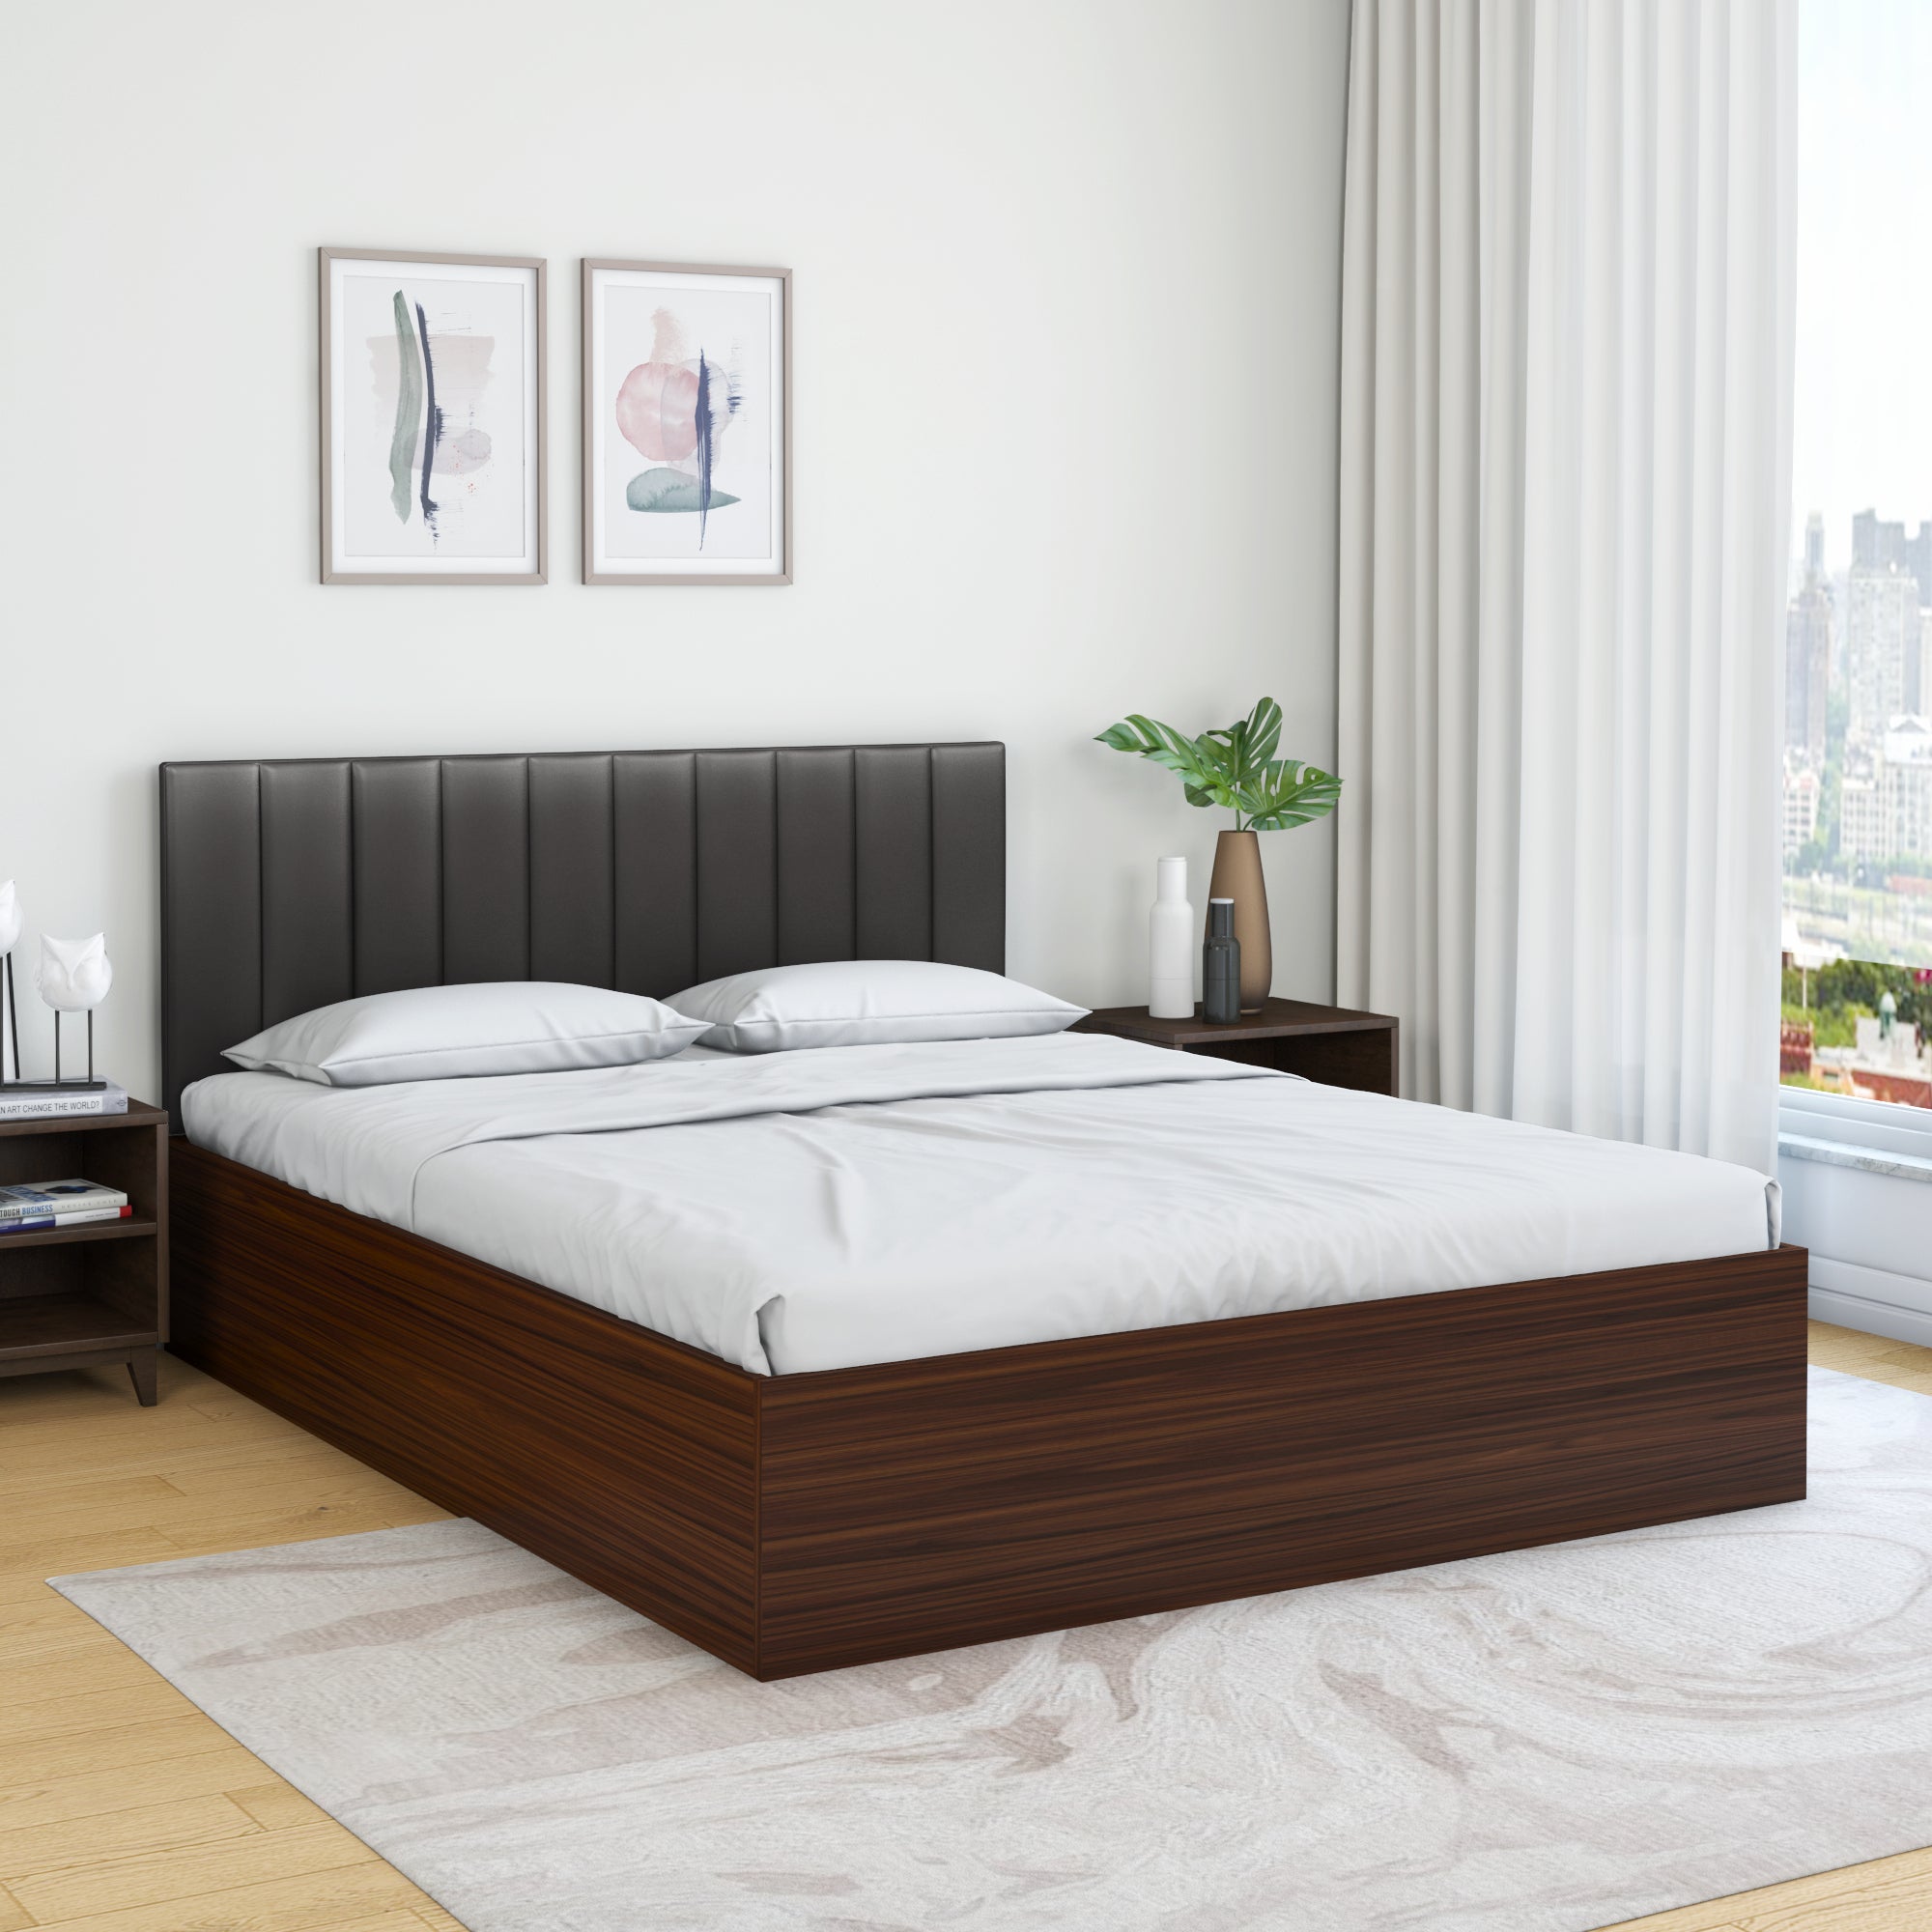 Buy Fusion Upholstered Wall Mounted Headboard Engineered Wood Queen Bed  With Box Storage (Grey & Walnut)Online- @Home by Nilkamal | Nilkamal  At-home @home